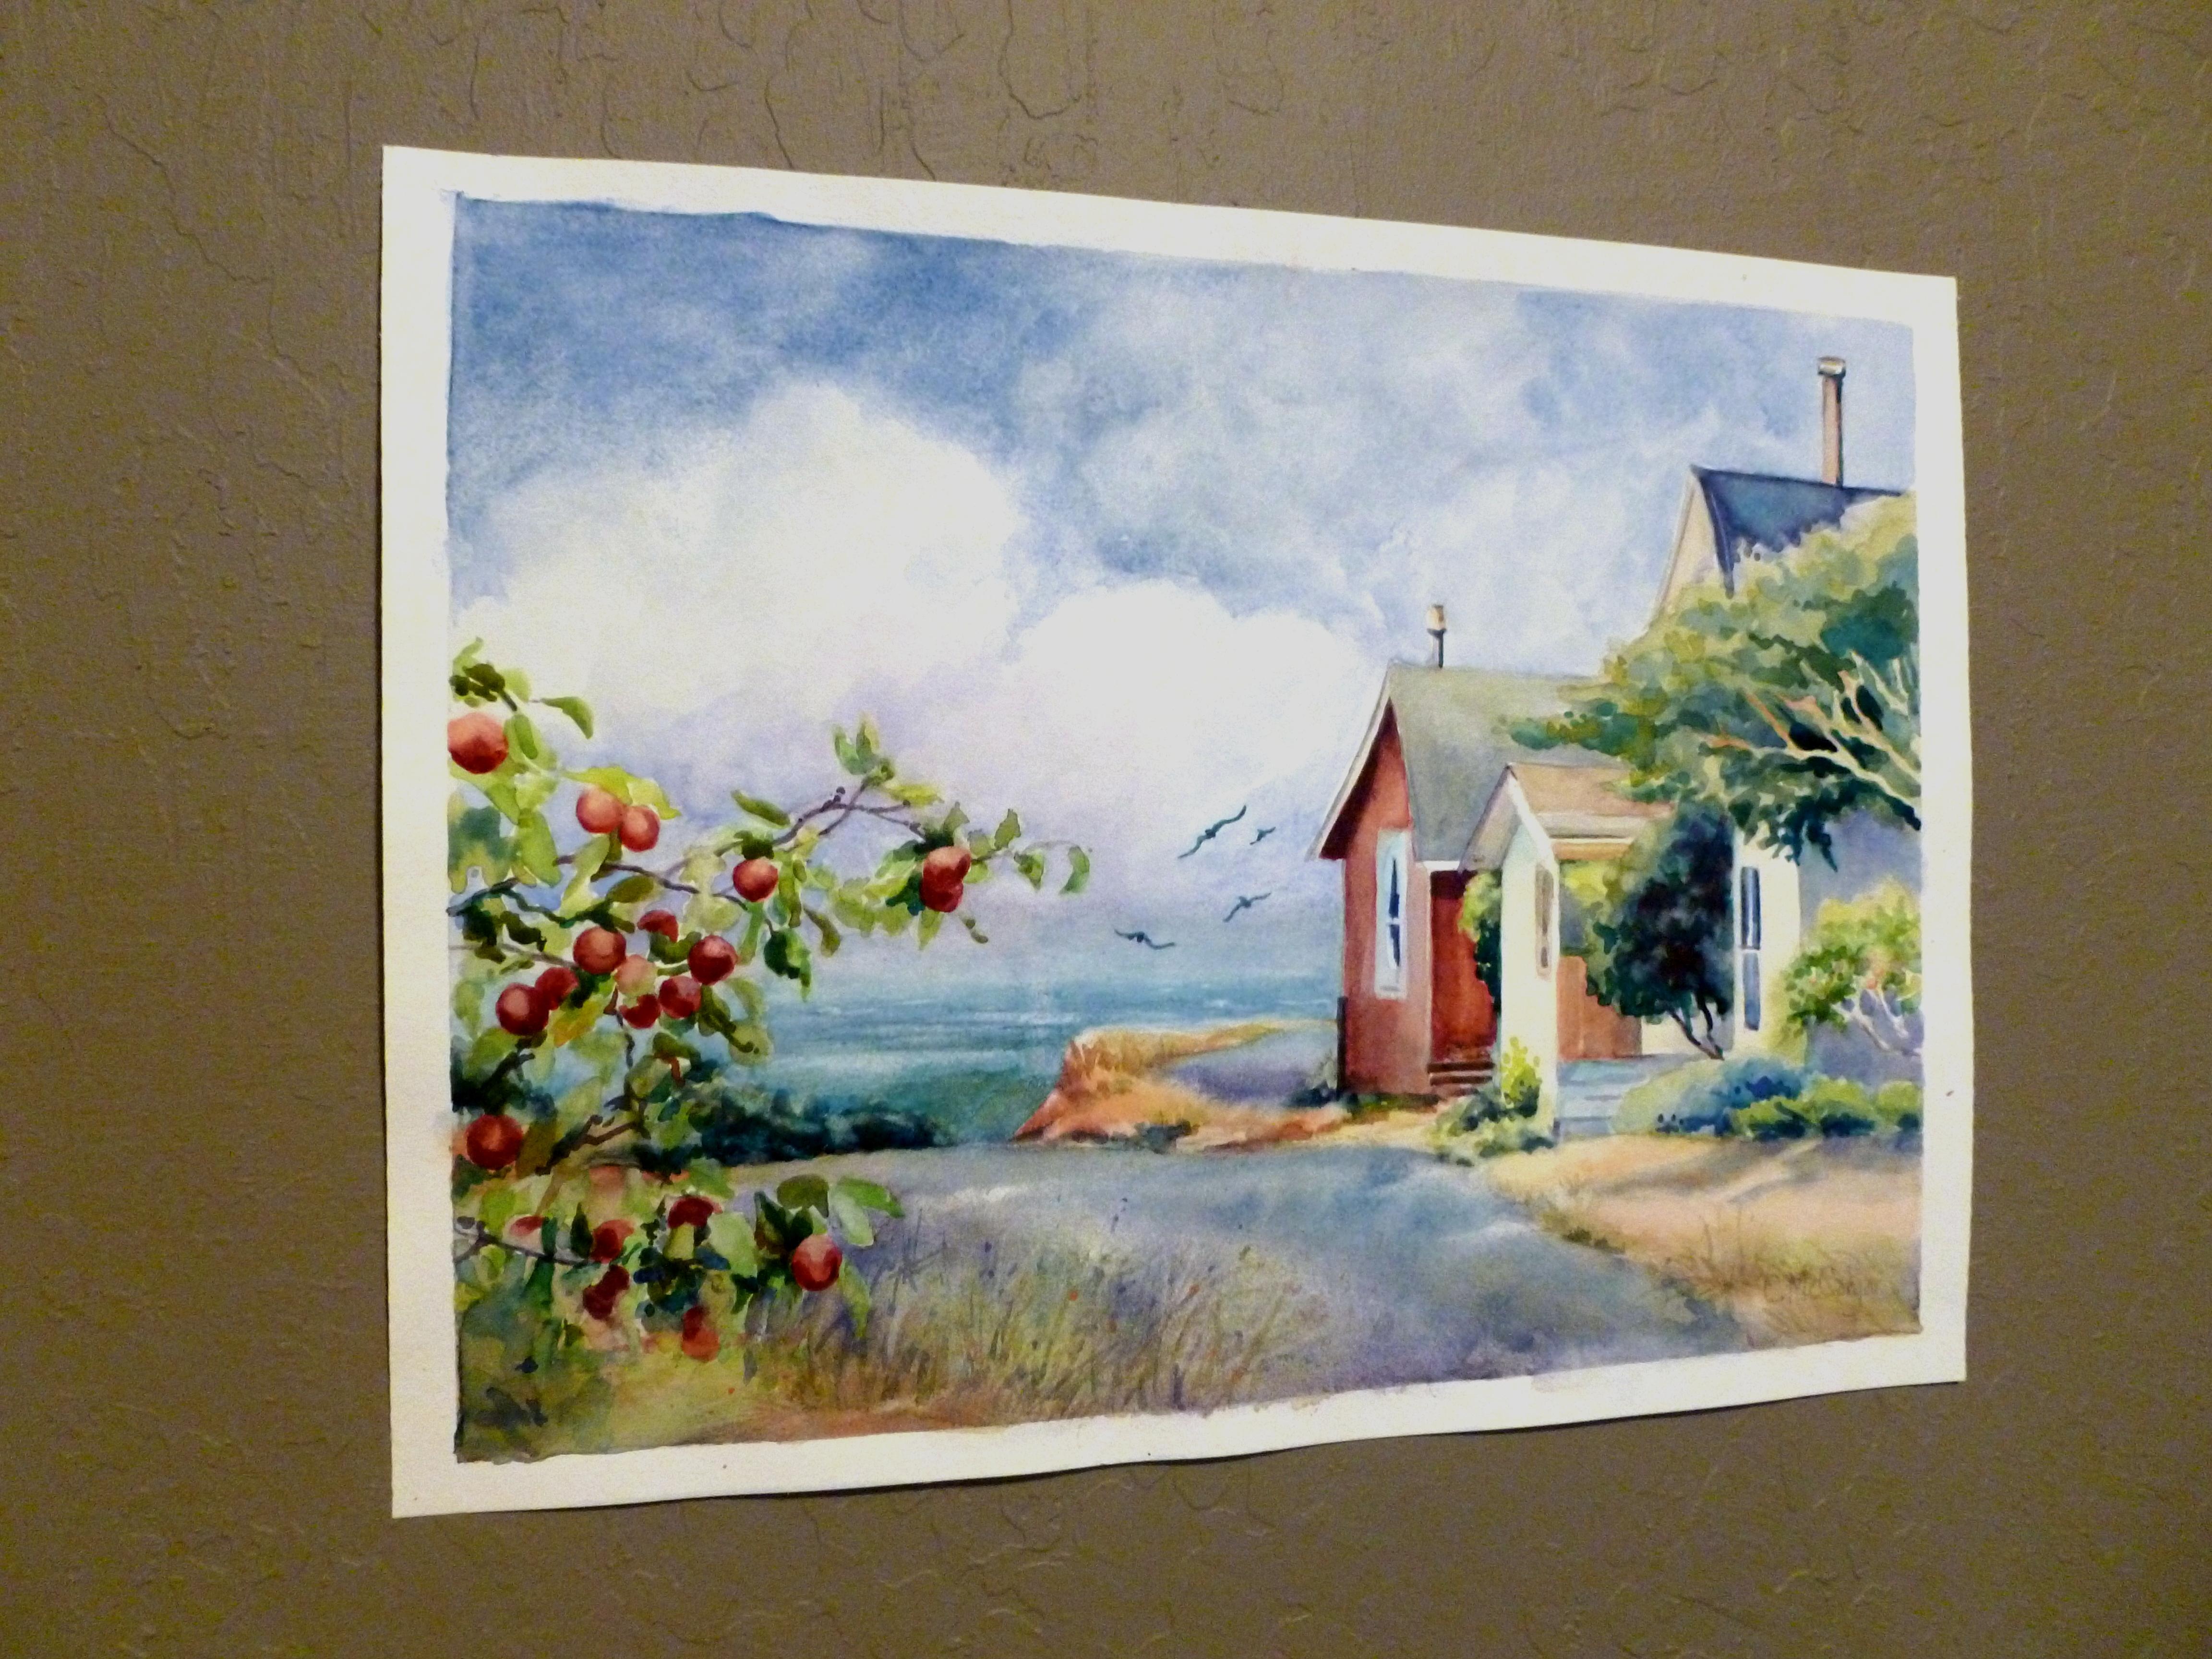 Cottages by the Sea Catherine McCargar, Watercolor painting on paper
One-of-a-kind
Signed on front
2014
12 in. h x 16 in. w 
0 lbs. 1 oz. 

 Artist Comments 
This scene depicts seaside cottages on the northern California coast of Mendocino. A